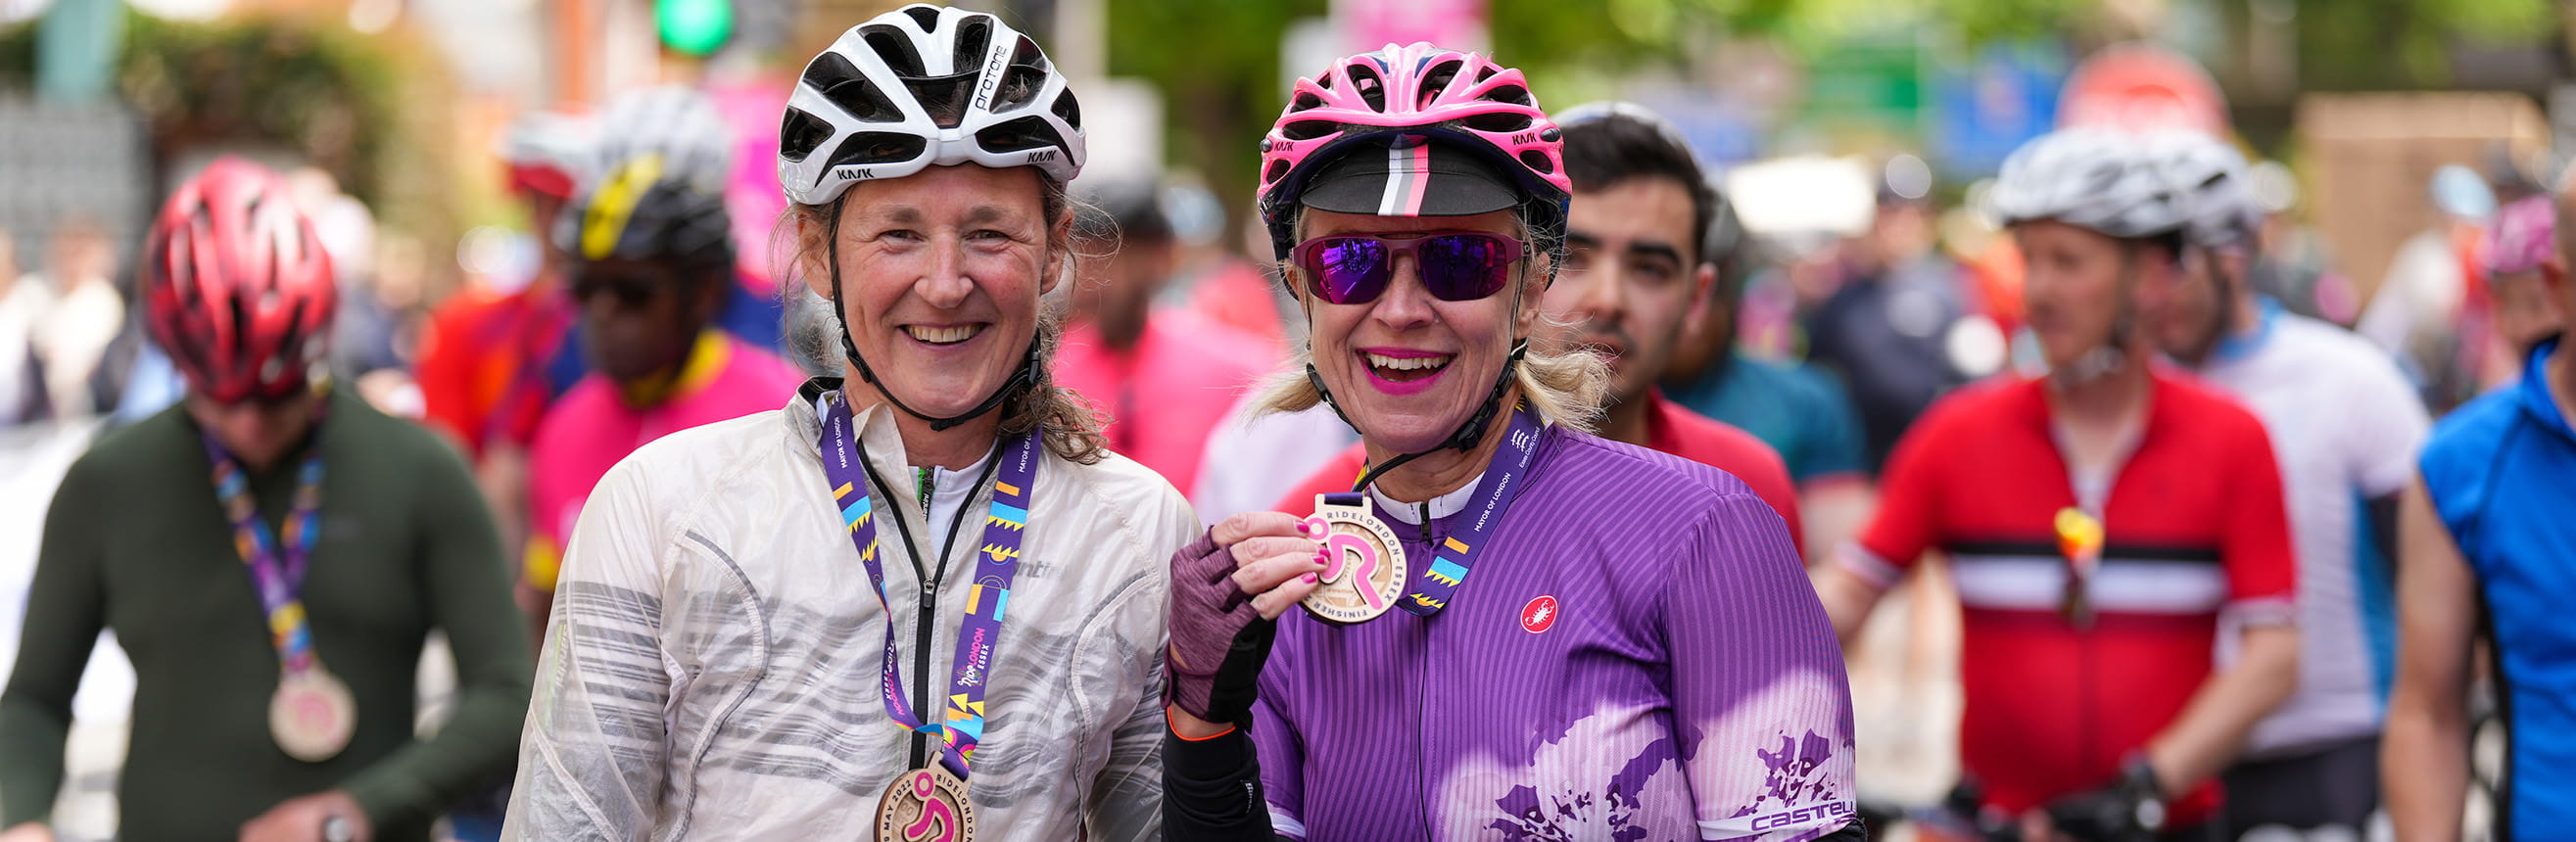 Two women showing their medals at the Finish line of RideLondon 2022